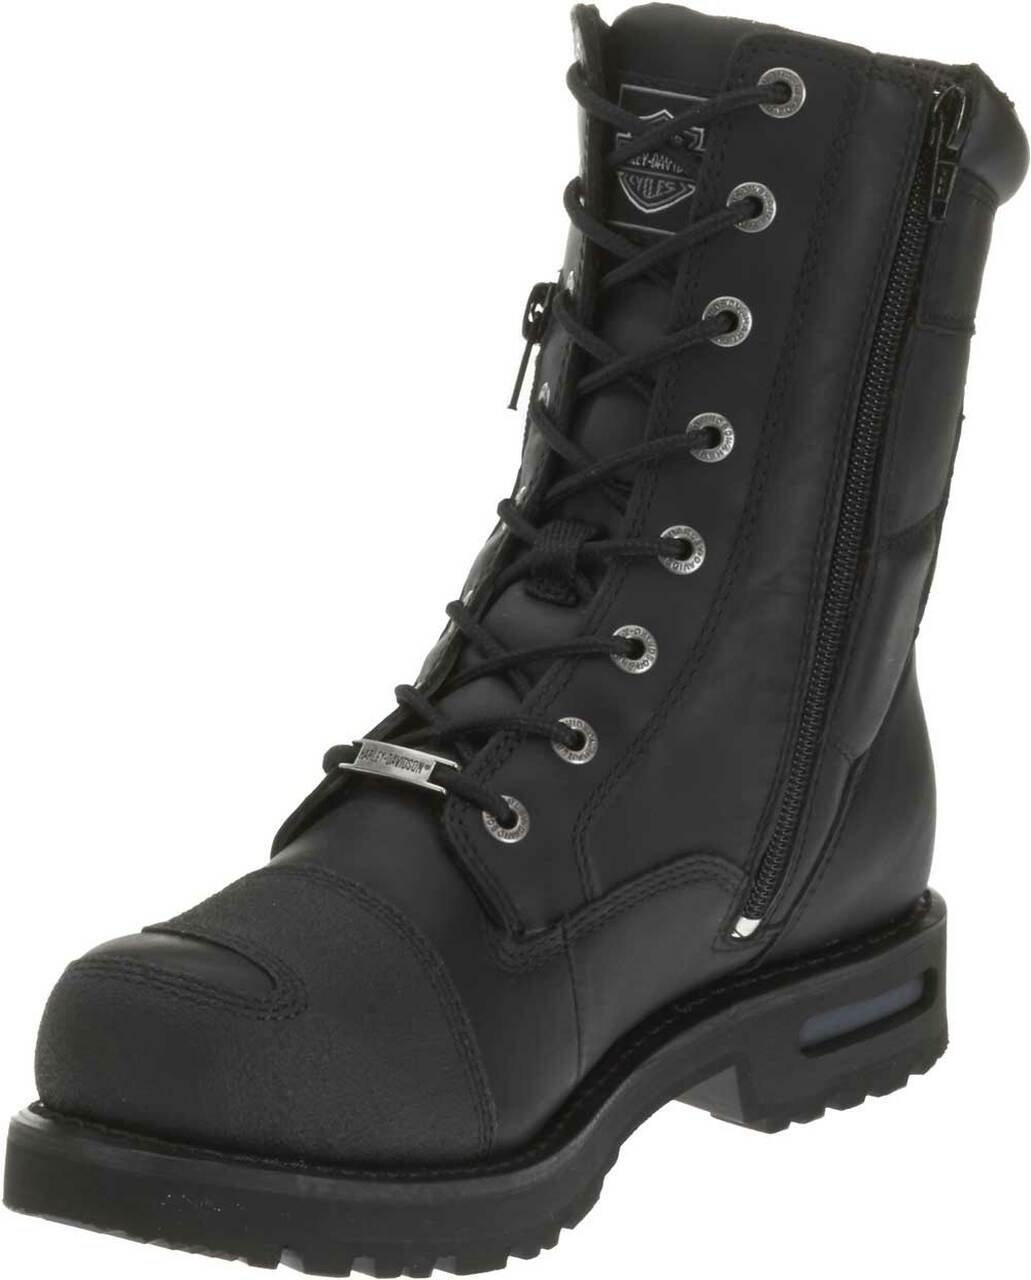 Men's Boots - Riddick 8-Inch Lace-Up by Harley Davidson®